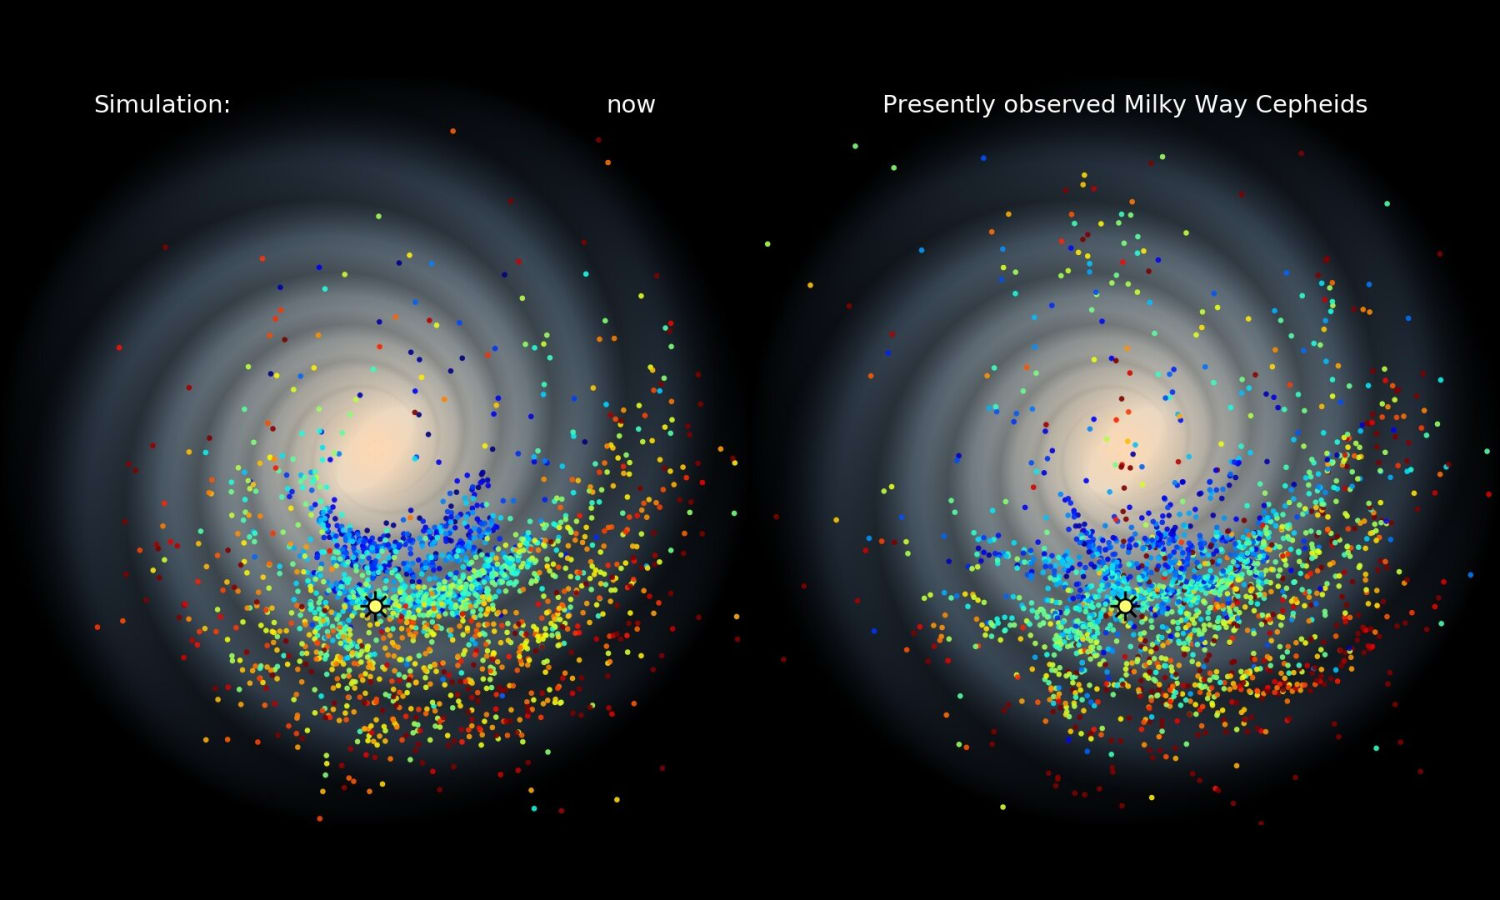 A 3-D model of the Milky Way Galaxy using data from Cepheids